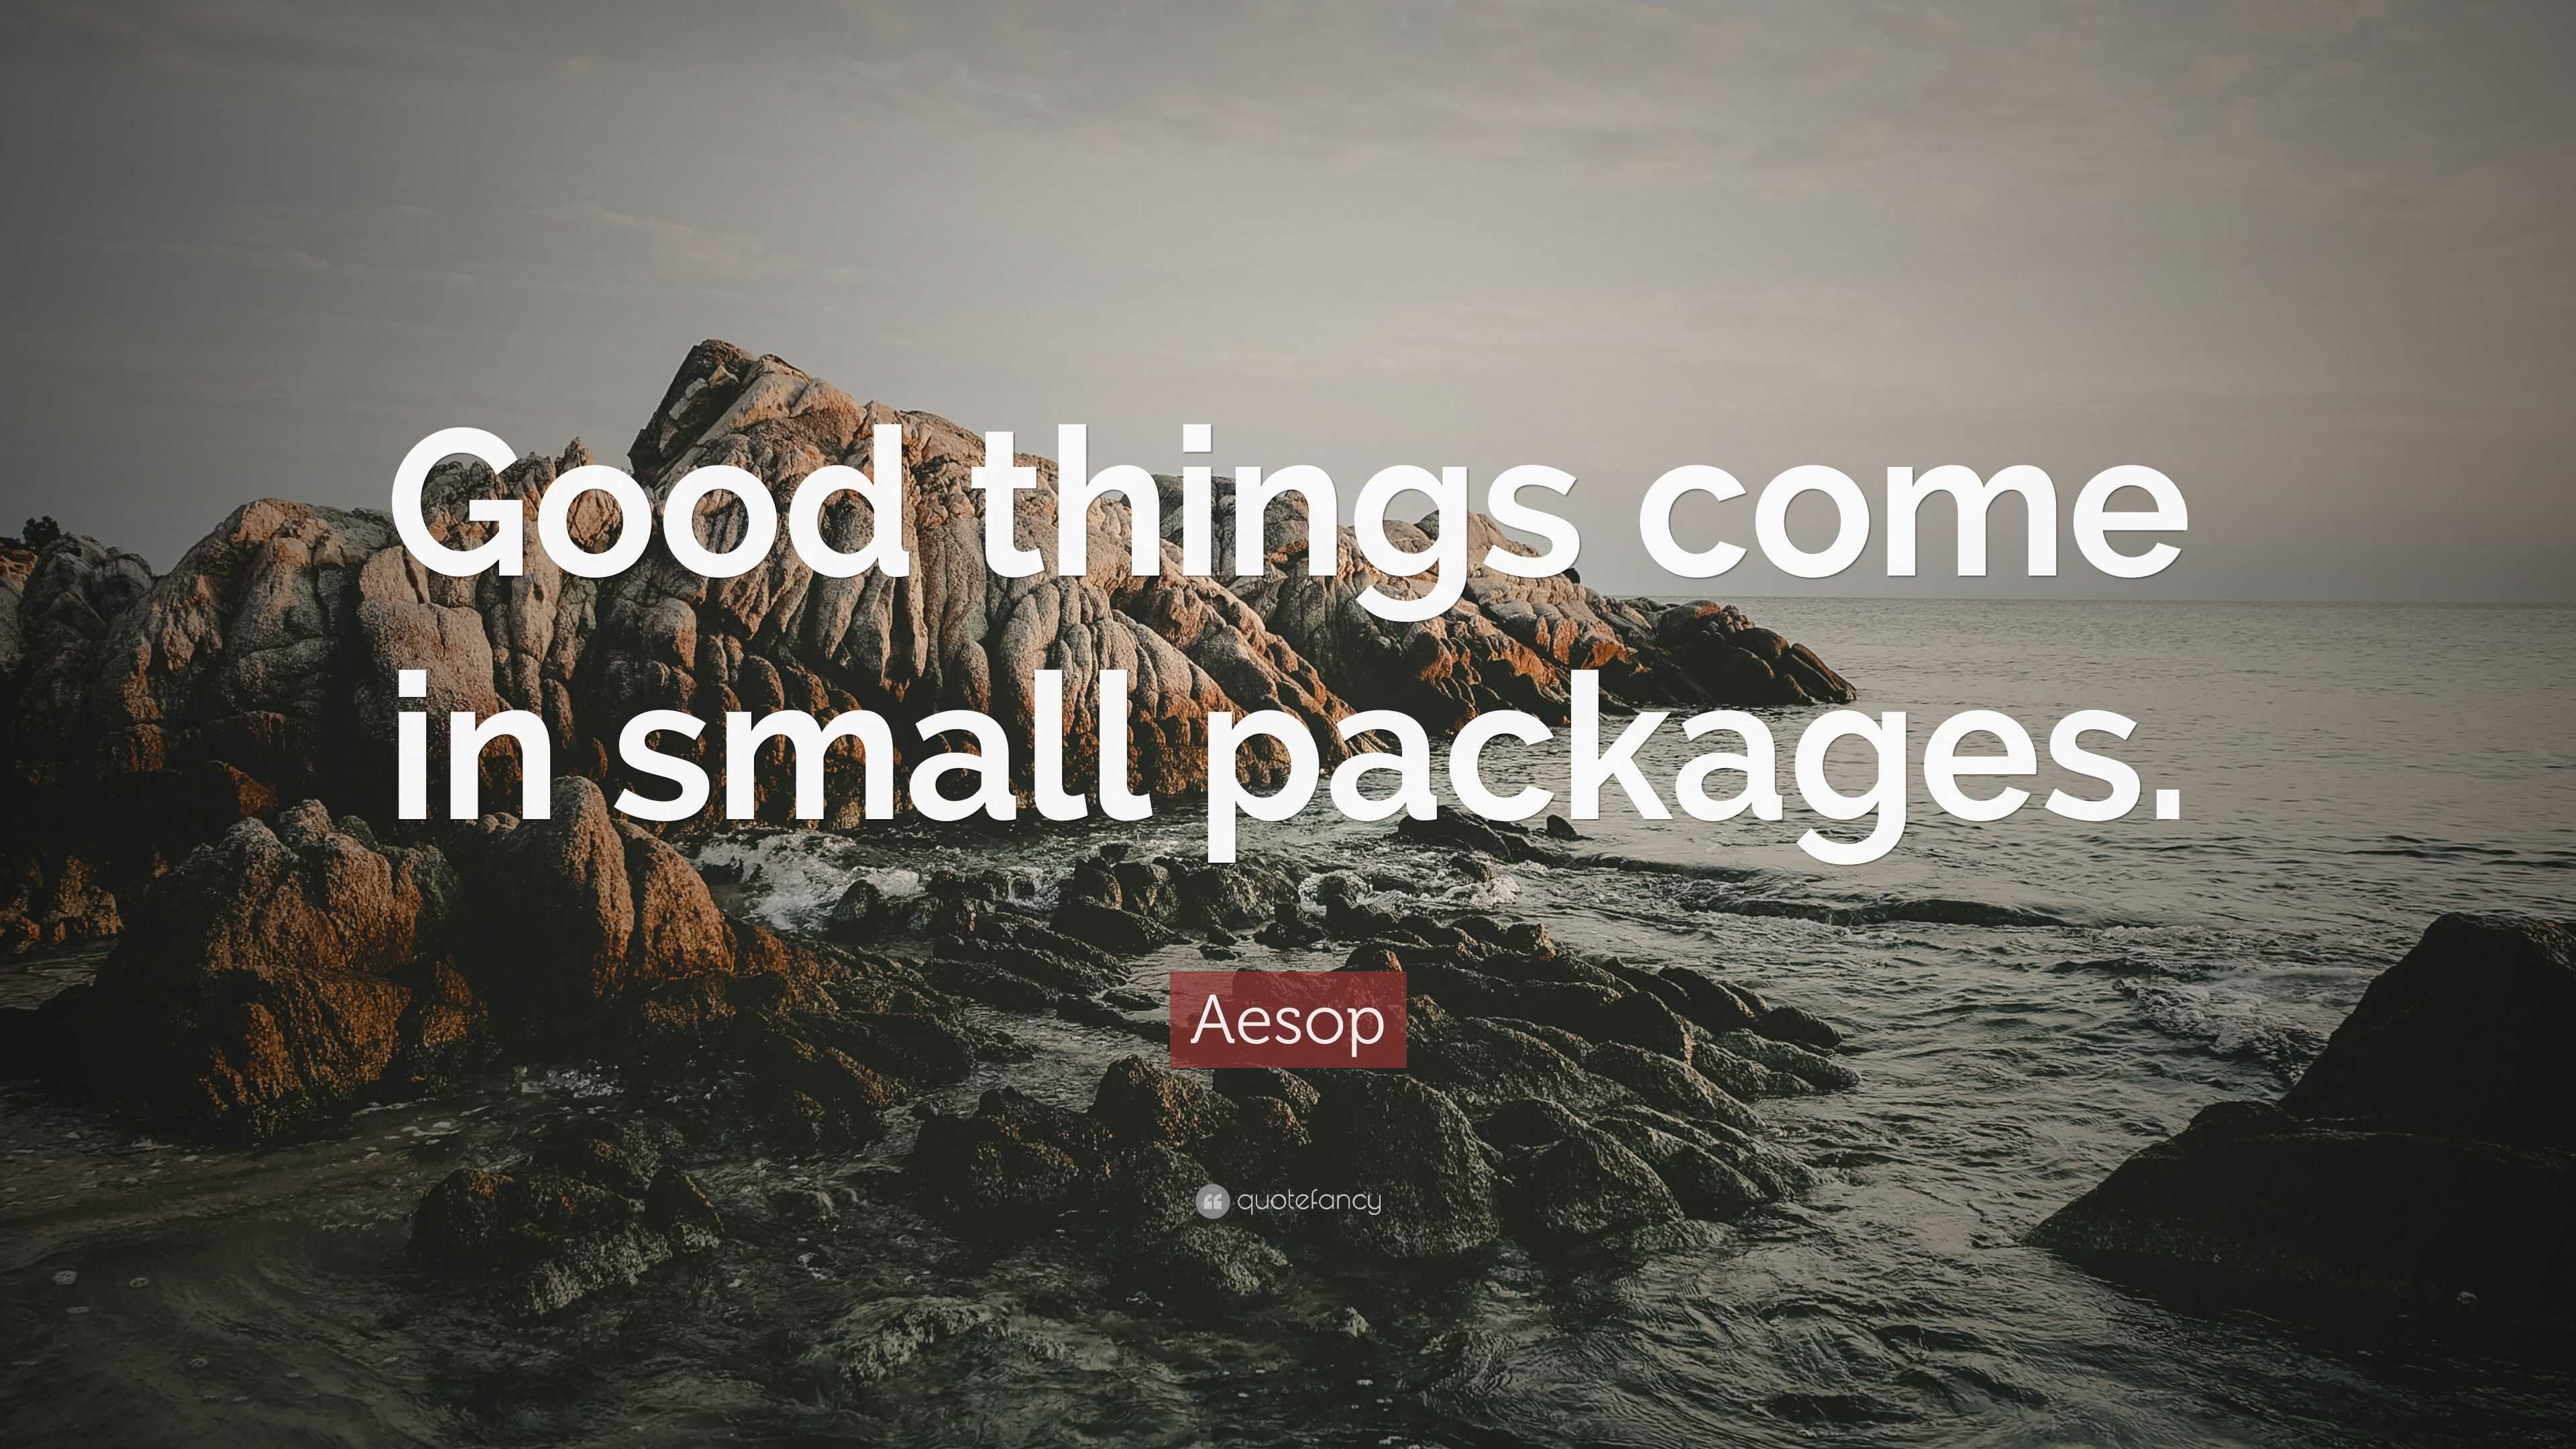 Aesop Quote: "Good things come in small packages." (12 wallpapers) - Quotefancy